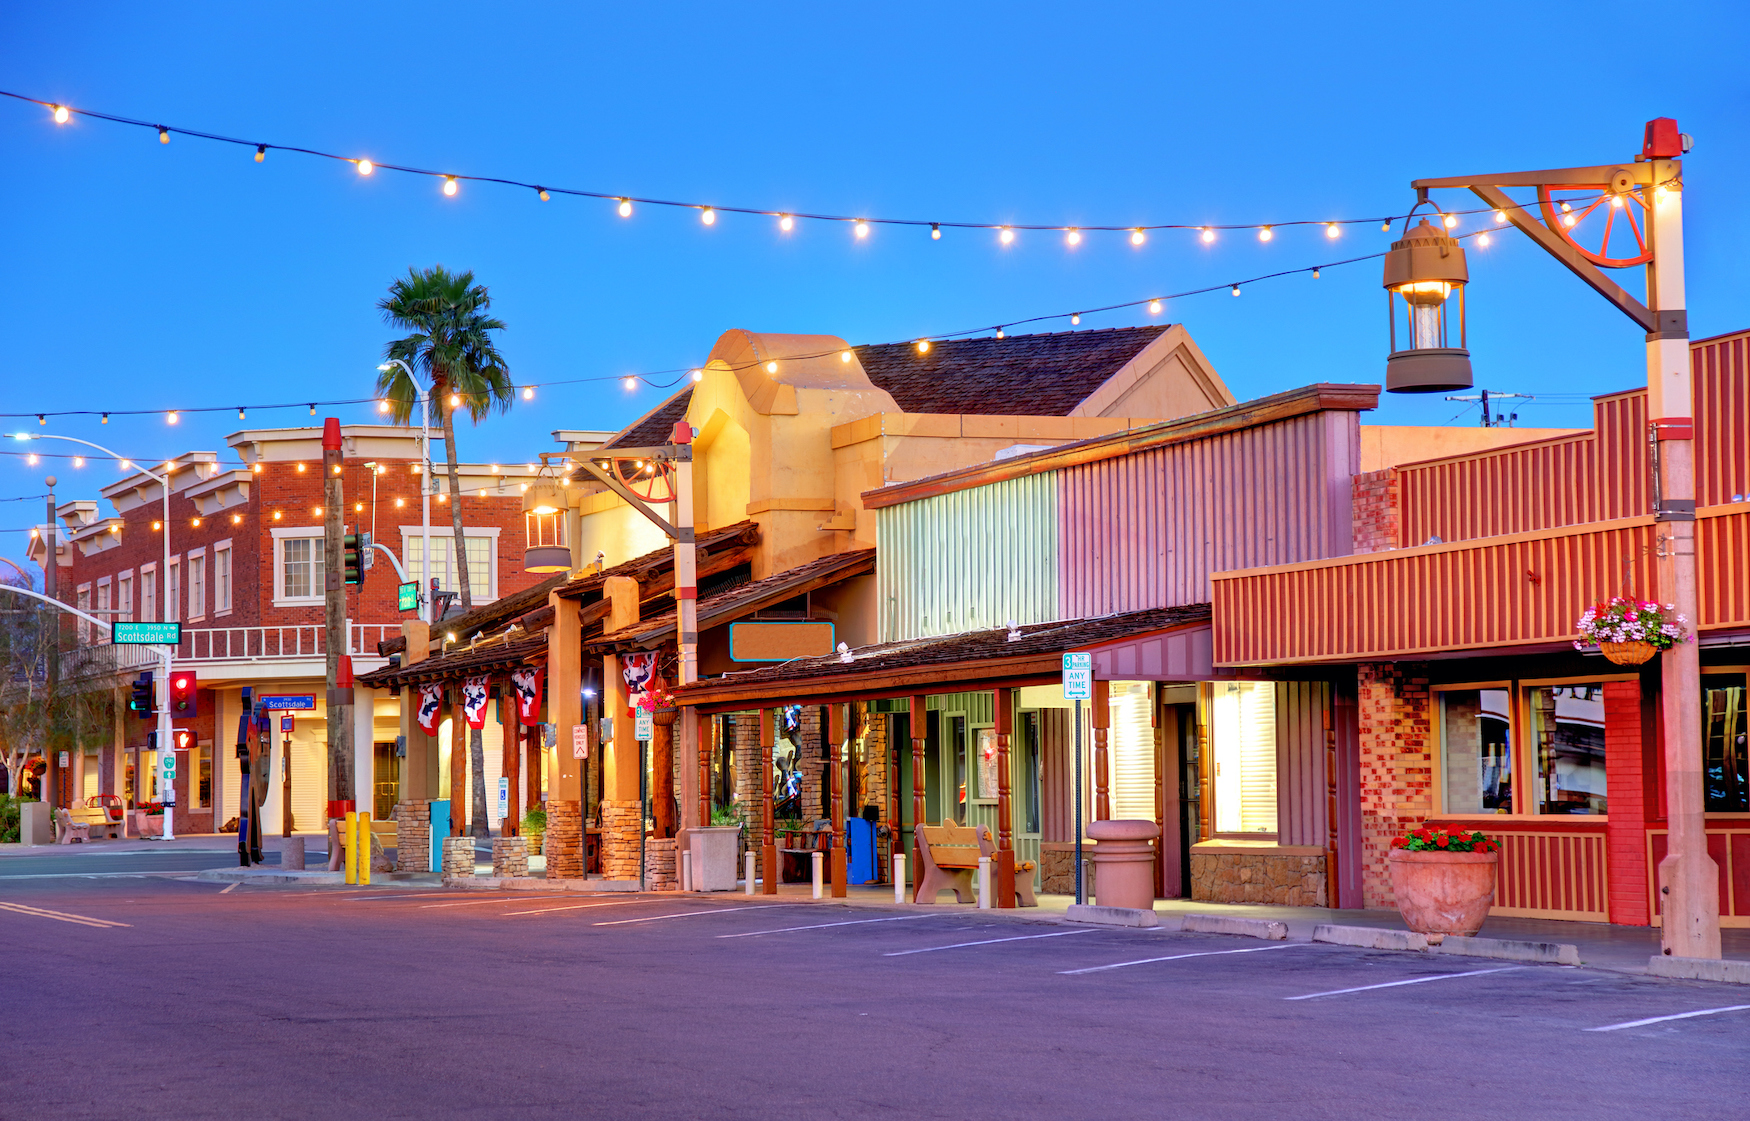 Peruse Our Scenic Old Town Scottsdale Rentals